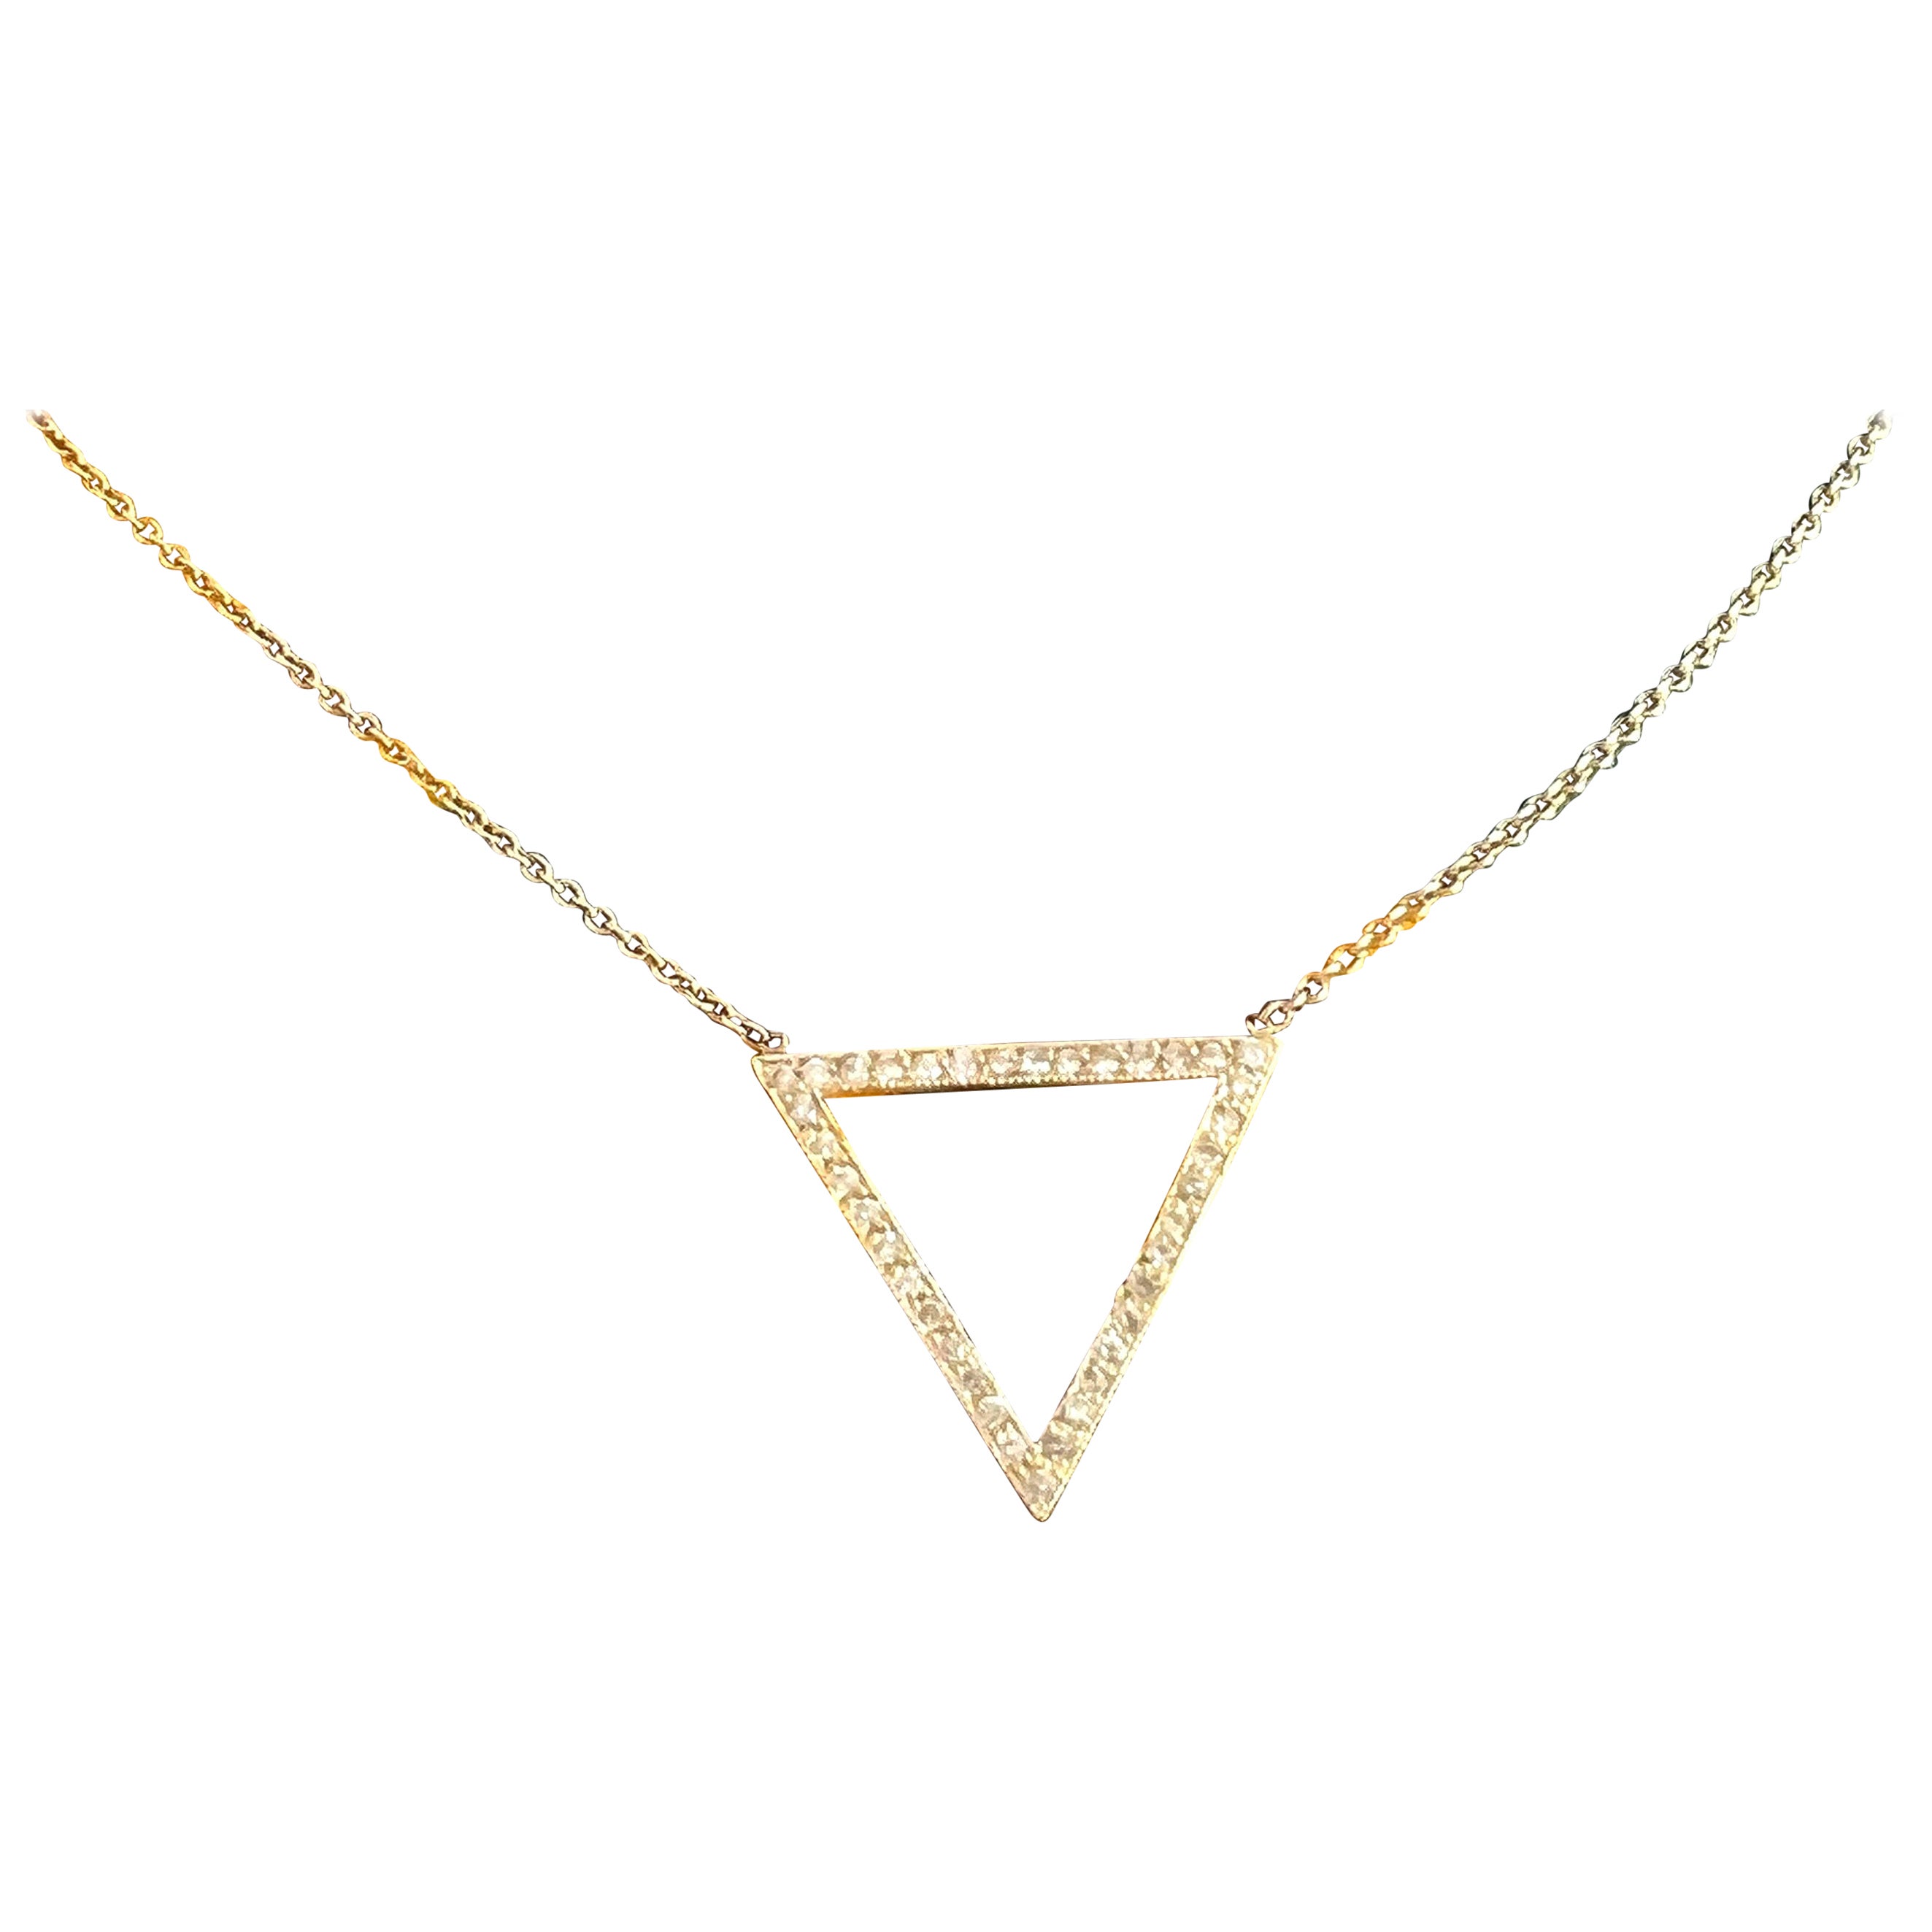 Zoe Chicco 14k Yellow Gold Diamond Triangle Pendant Station Necklace For Sale